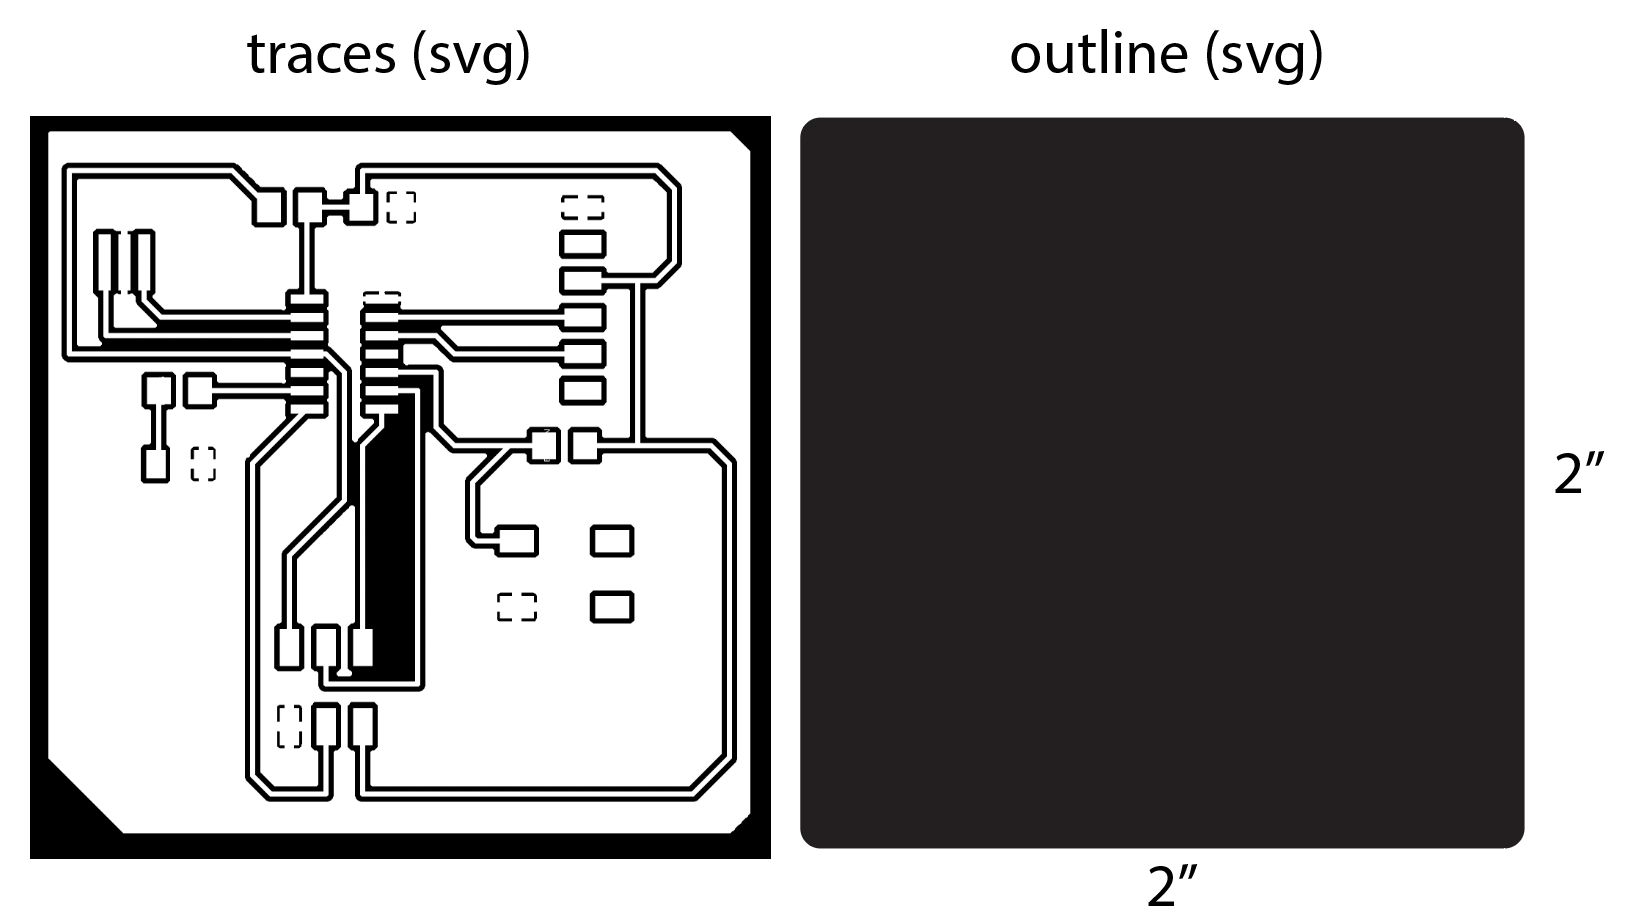 PCB traces and outline files as SVGs